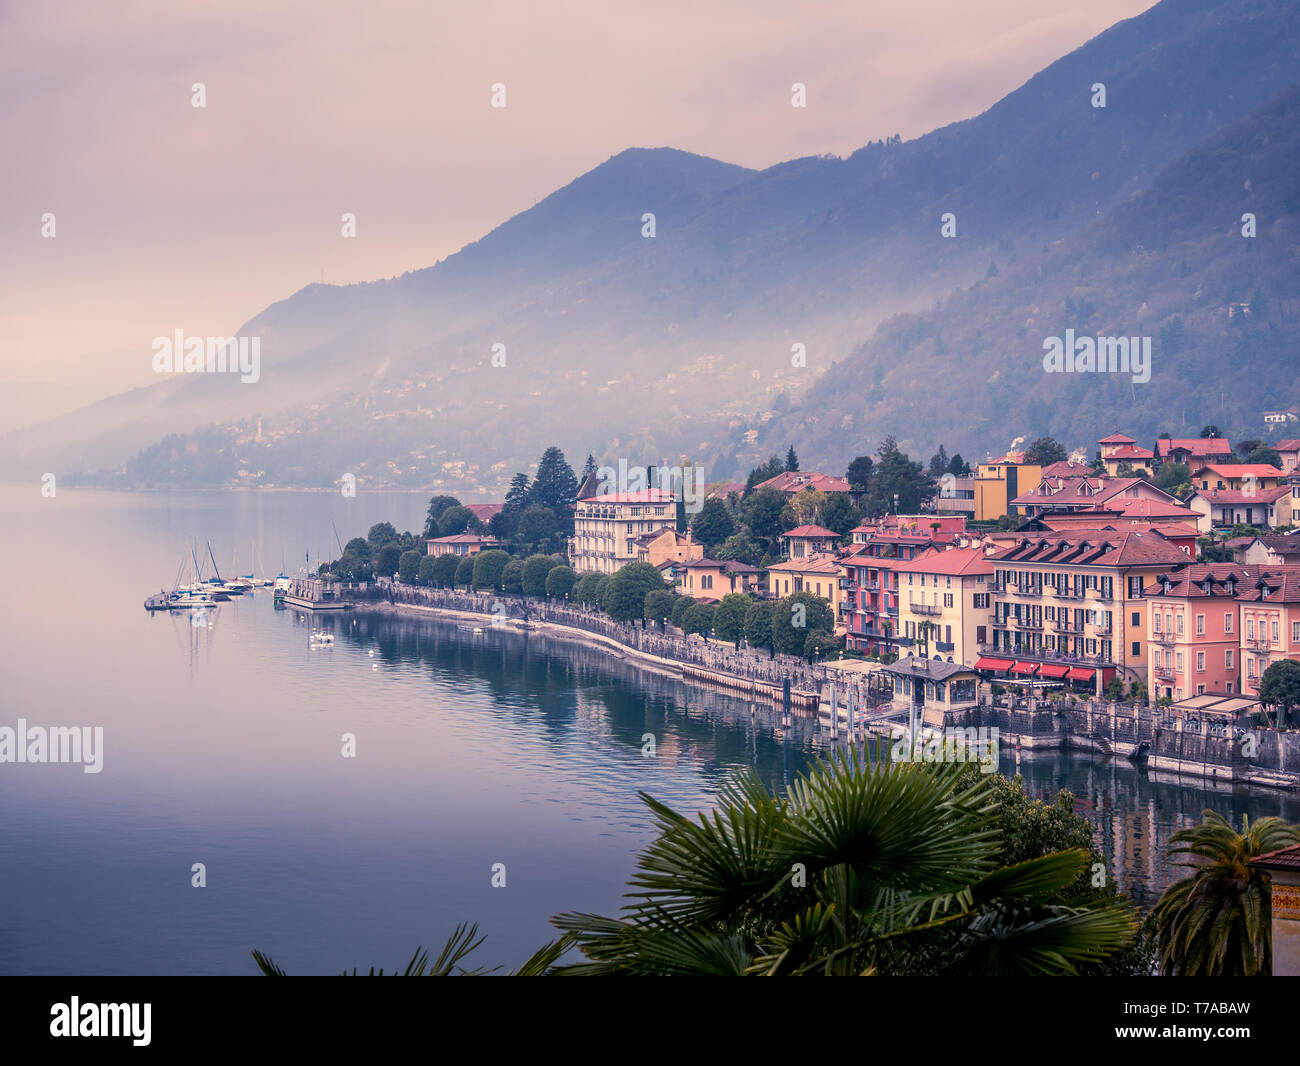 Image of a panorama view of cannero riviera at lake maggiore in italy on a foggy cloudy day Stock Photo